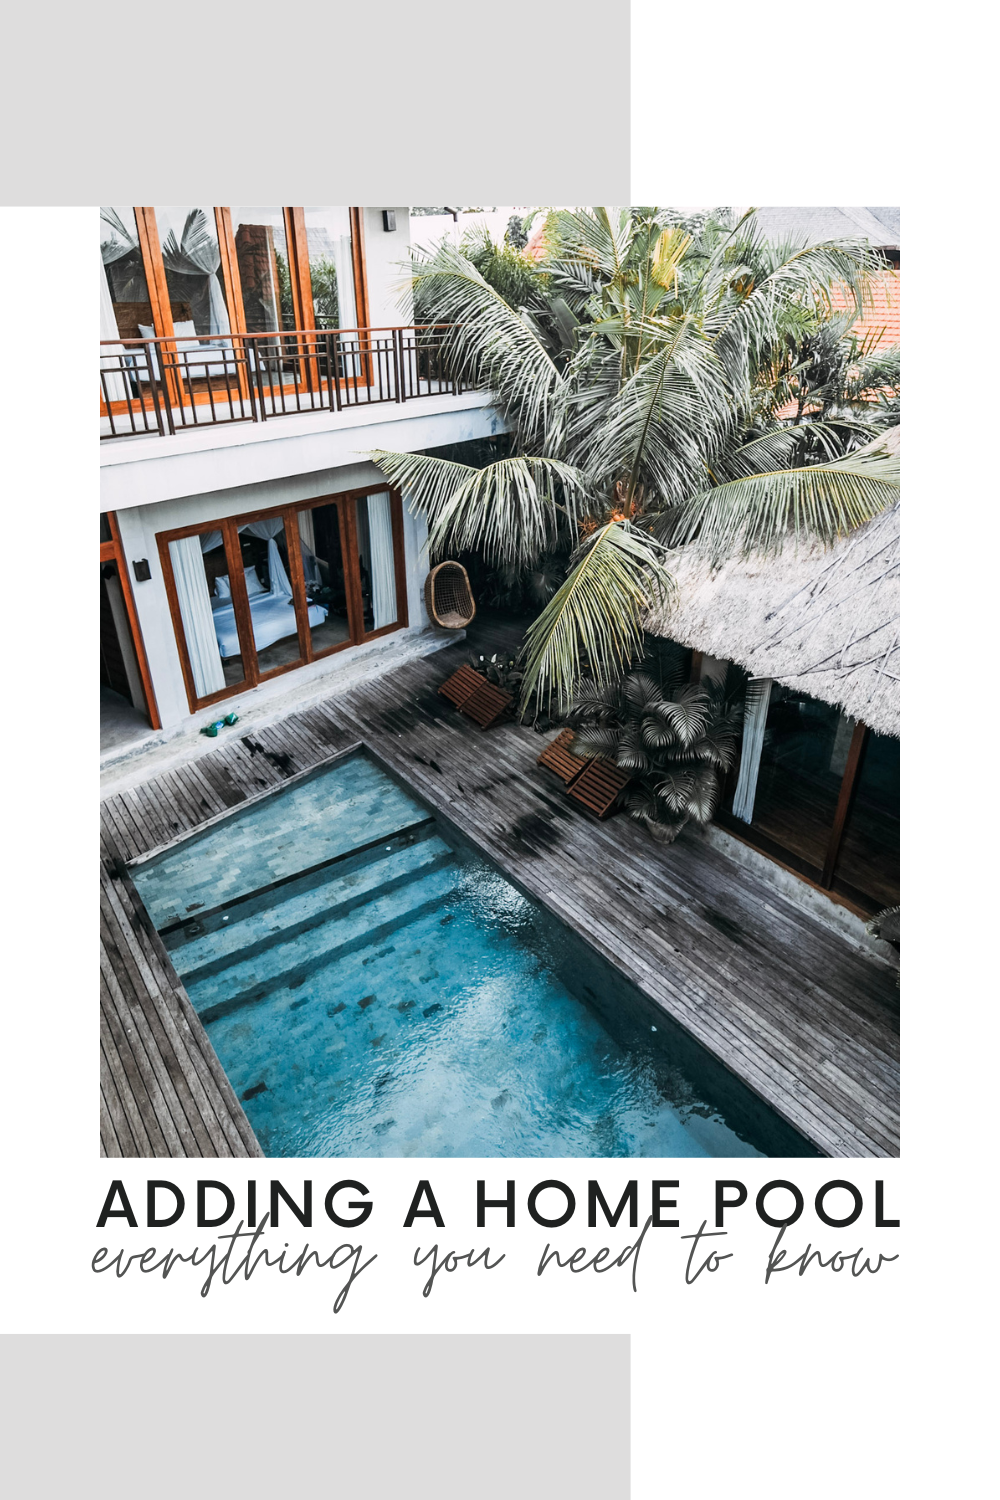 A beautiful home with palm trees, an in-ground pool is installed in the back yard. This article covers adding a home pool.